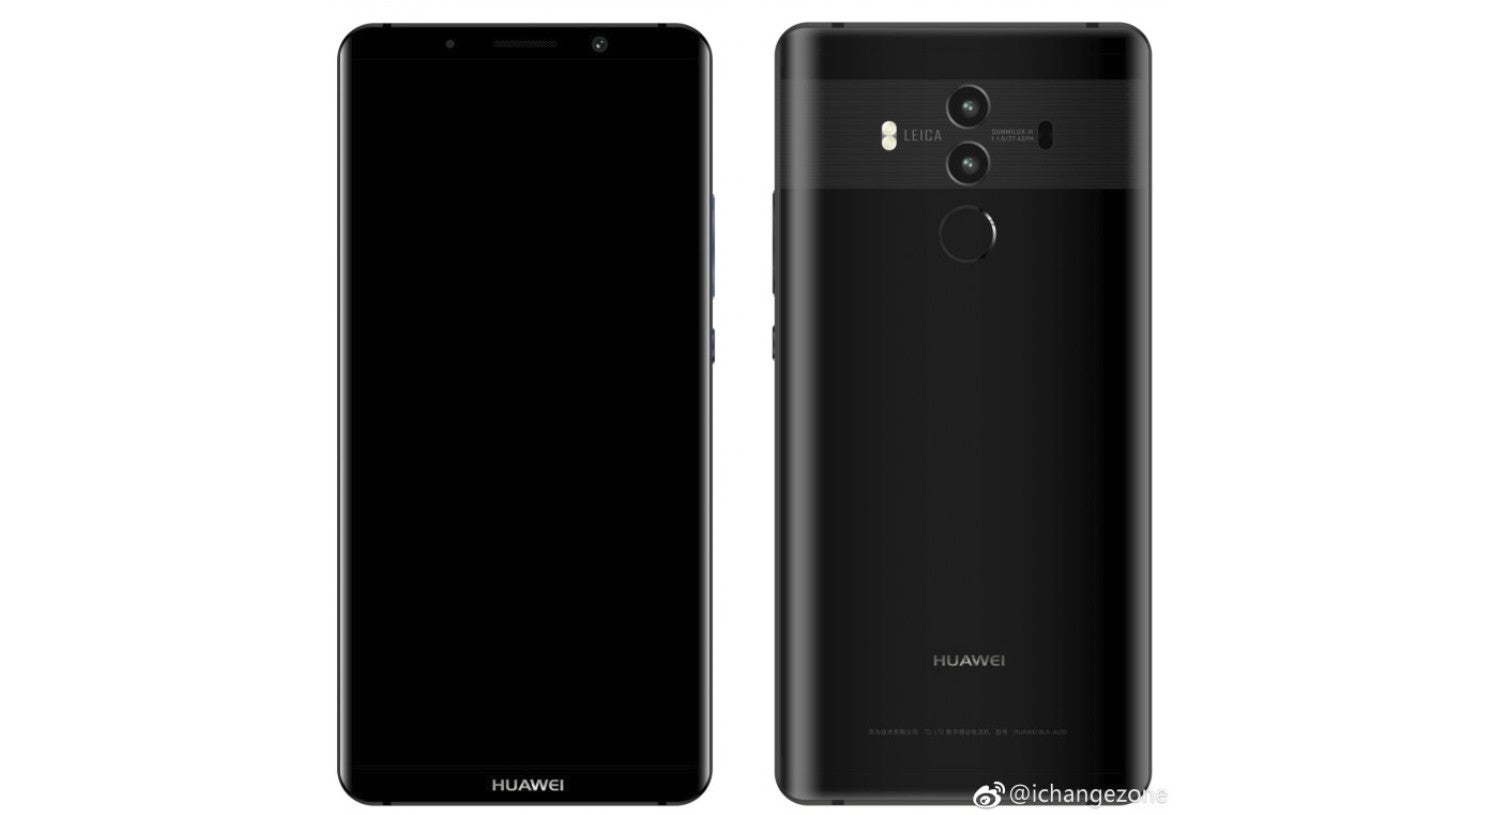 Here are a couple of more Huawei Mate 10 Pro renders before the October 16 announcement